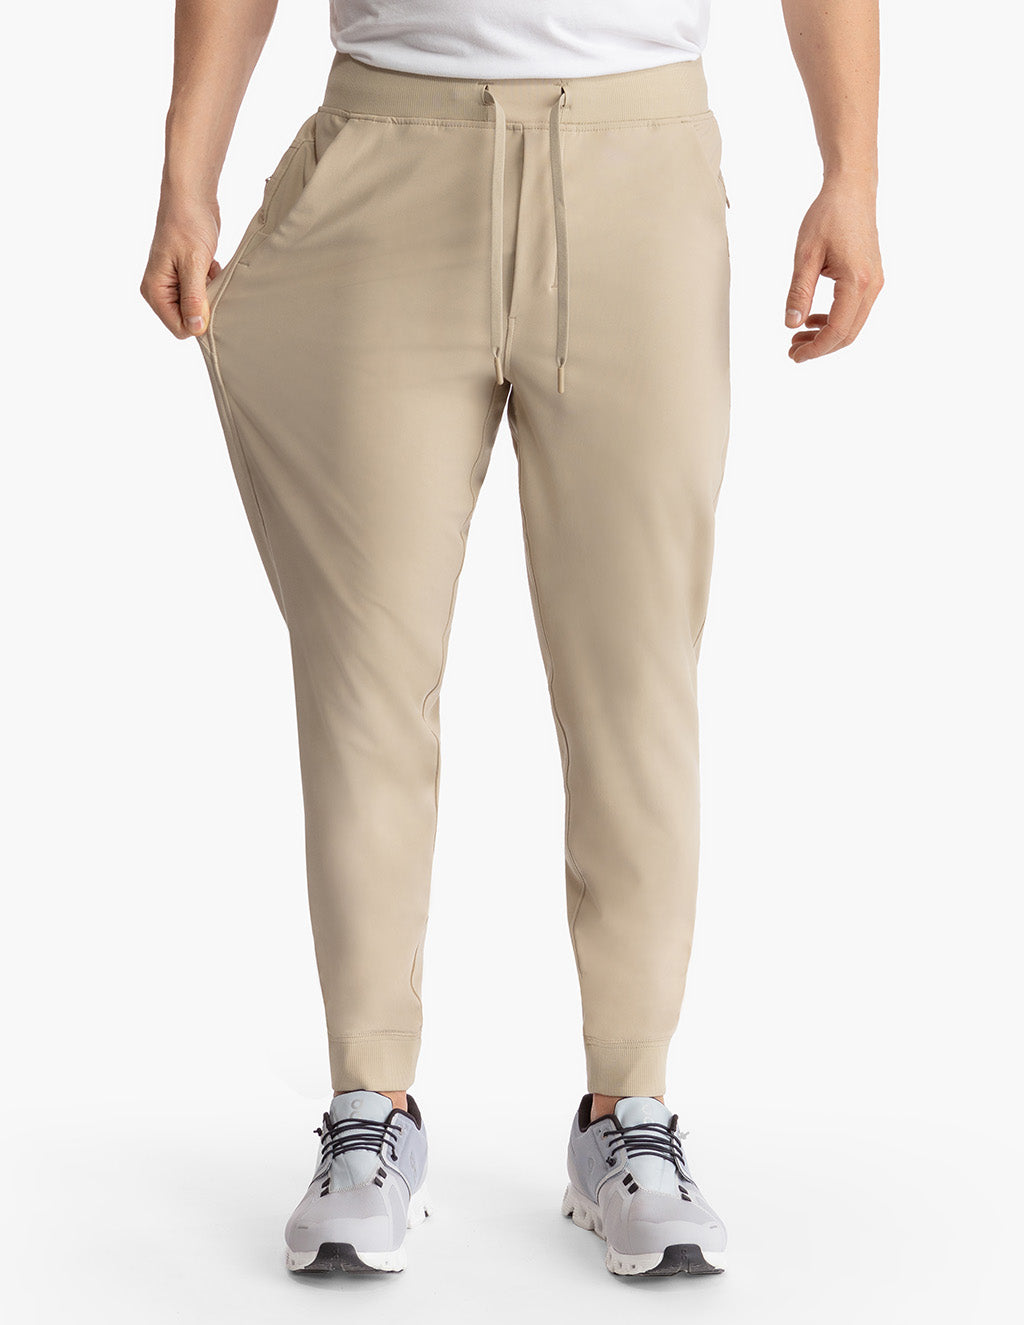 has anyone figured out the Lululemon bar sizing? I spoke to someone via  live chat on the Lululemon website and he had no idea what I was talking  about. I've seen people say 3 bars are size 6 and size 8 which is it?!  these are balance and resist tights